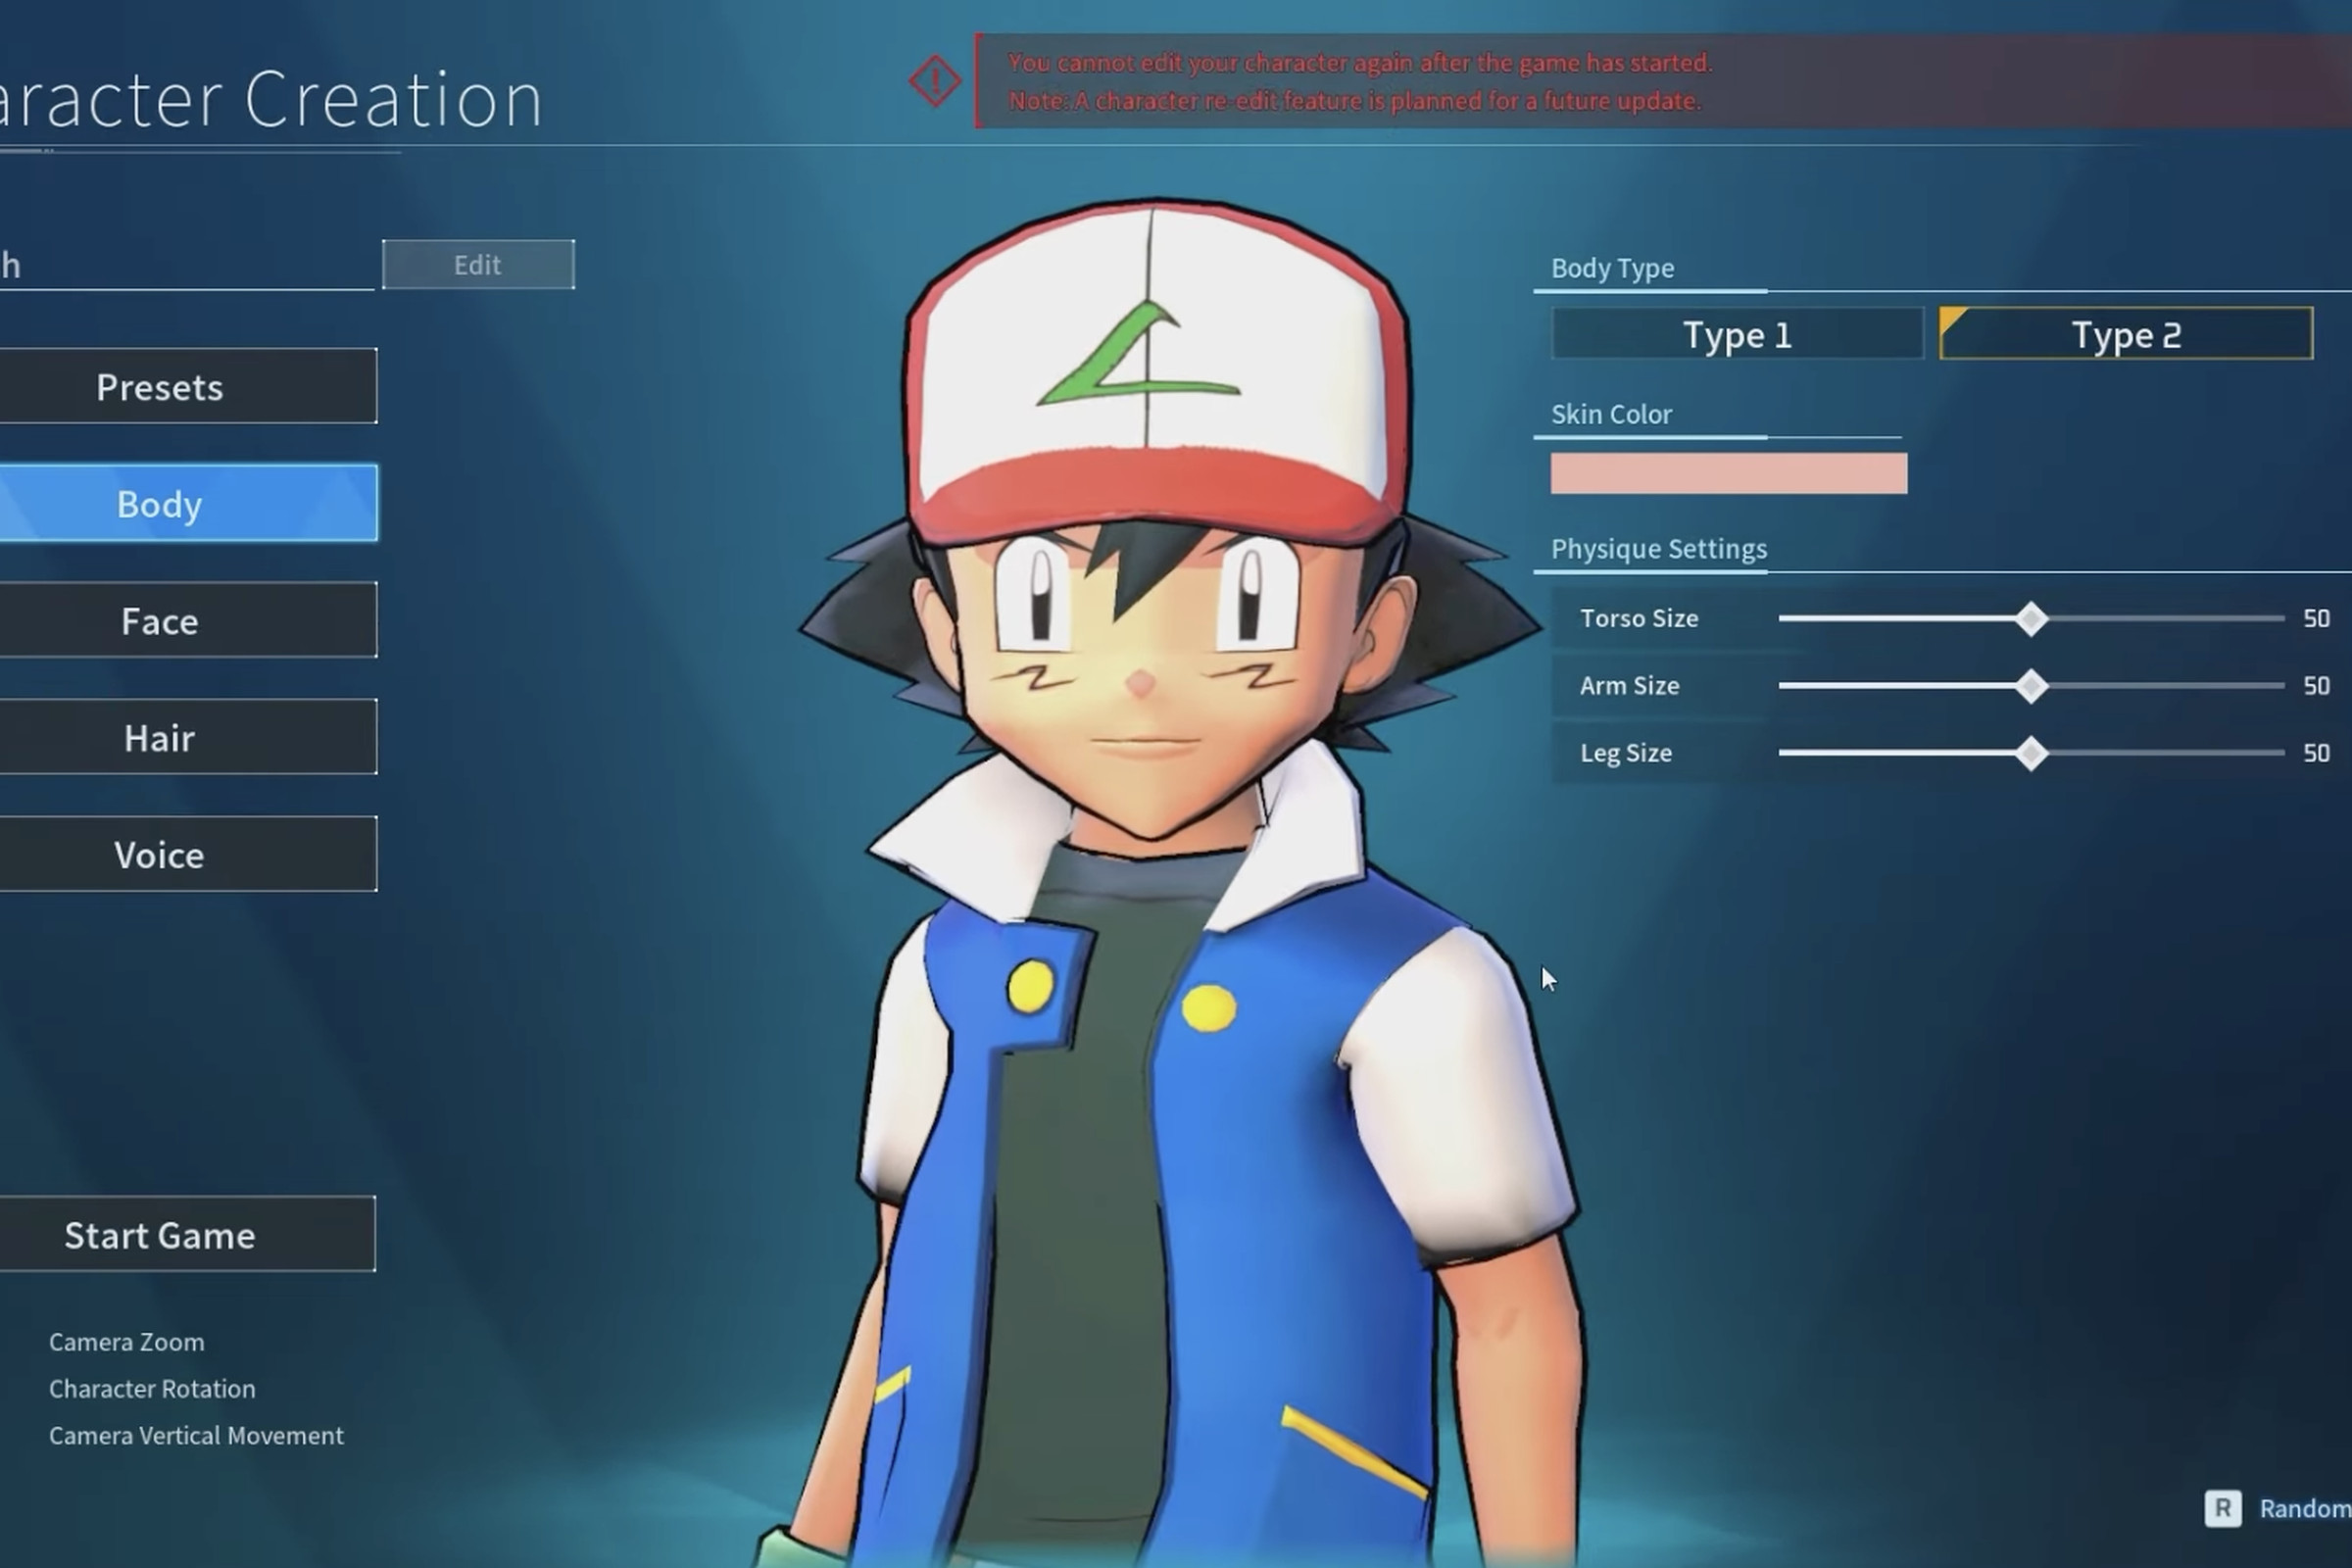 Screenshot from YouTuber ToastedShoes’ video, “I modded ACTUAL Pokemon into Palworld,” featuring Pokémon character Ash Ketchum in Palworld’s character creator.